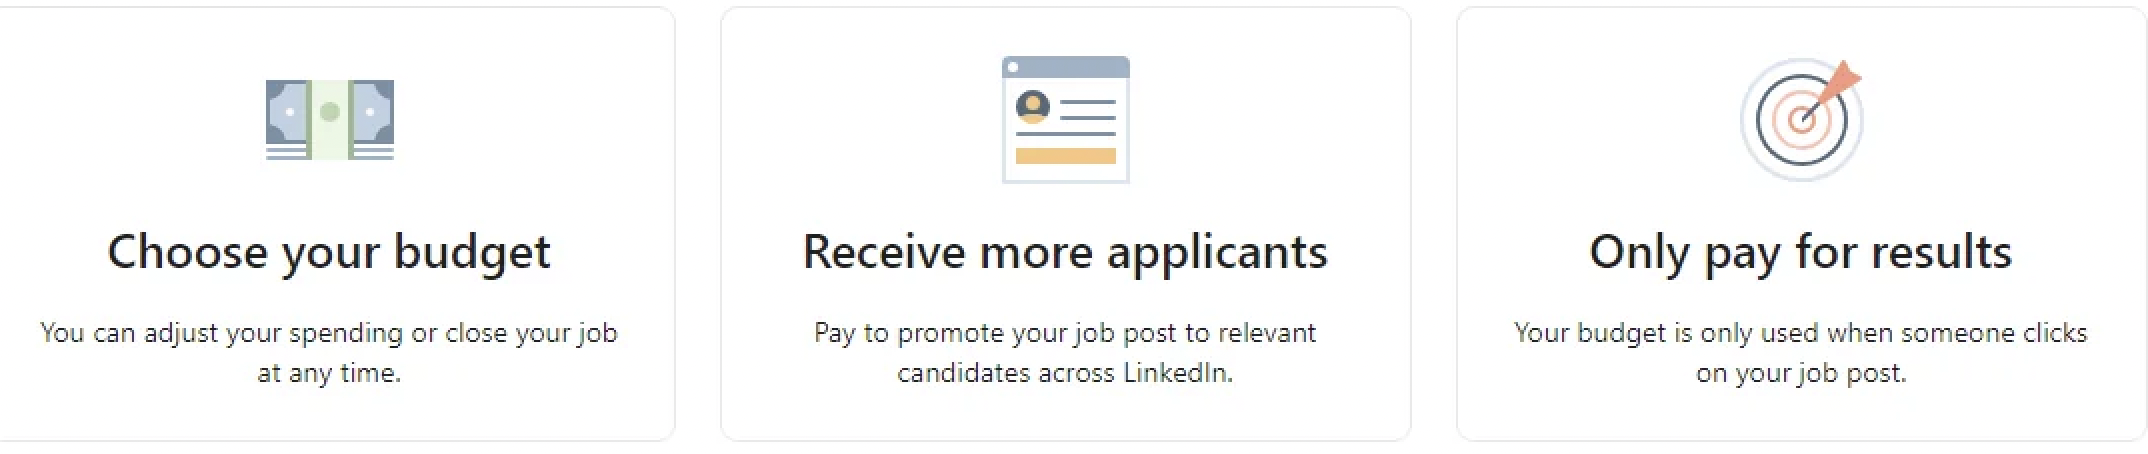 design - Choose your budget You can adjust your spending or close your job at any time. Receive more applicants Pay to promote your job post to relevant candidates across Linkedin. Only pay for results Your budget is only used when someone clicks on your 